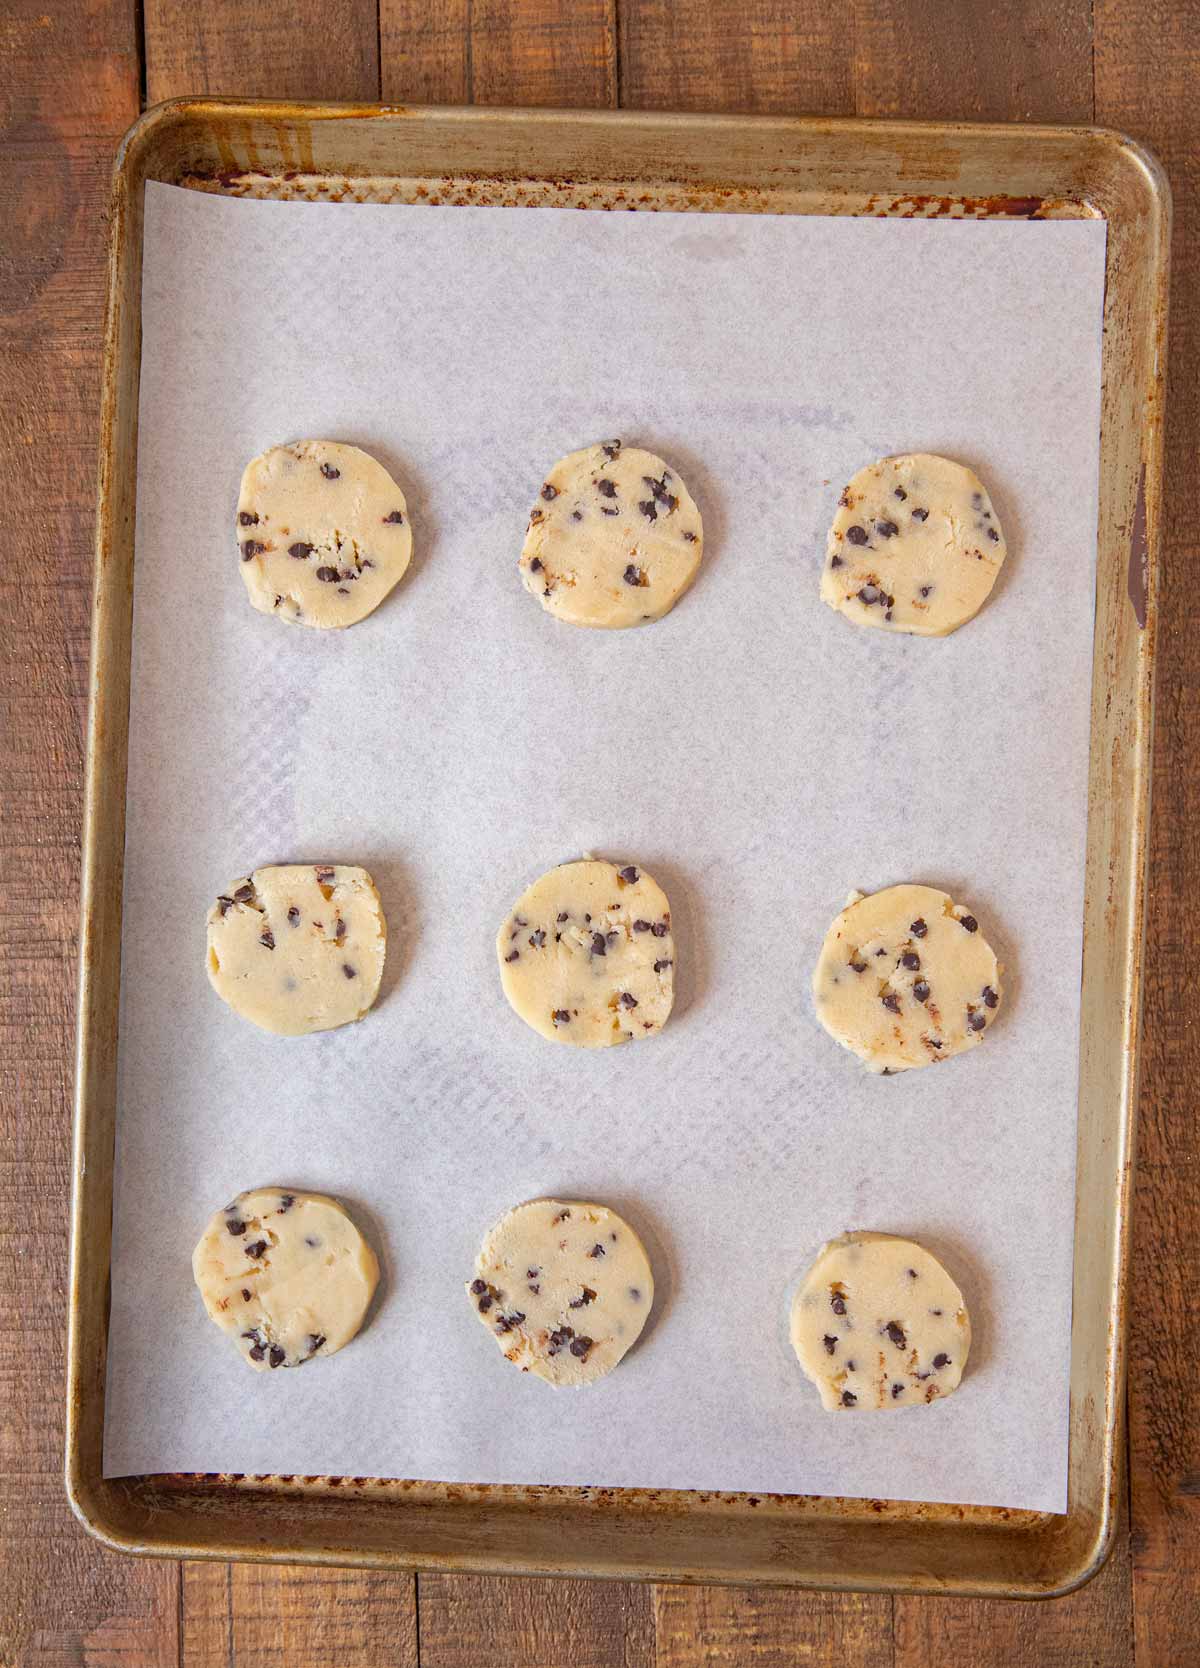 Chocolate Chip Shortbread Cookies on baking sheet before cooking